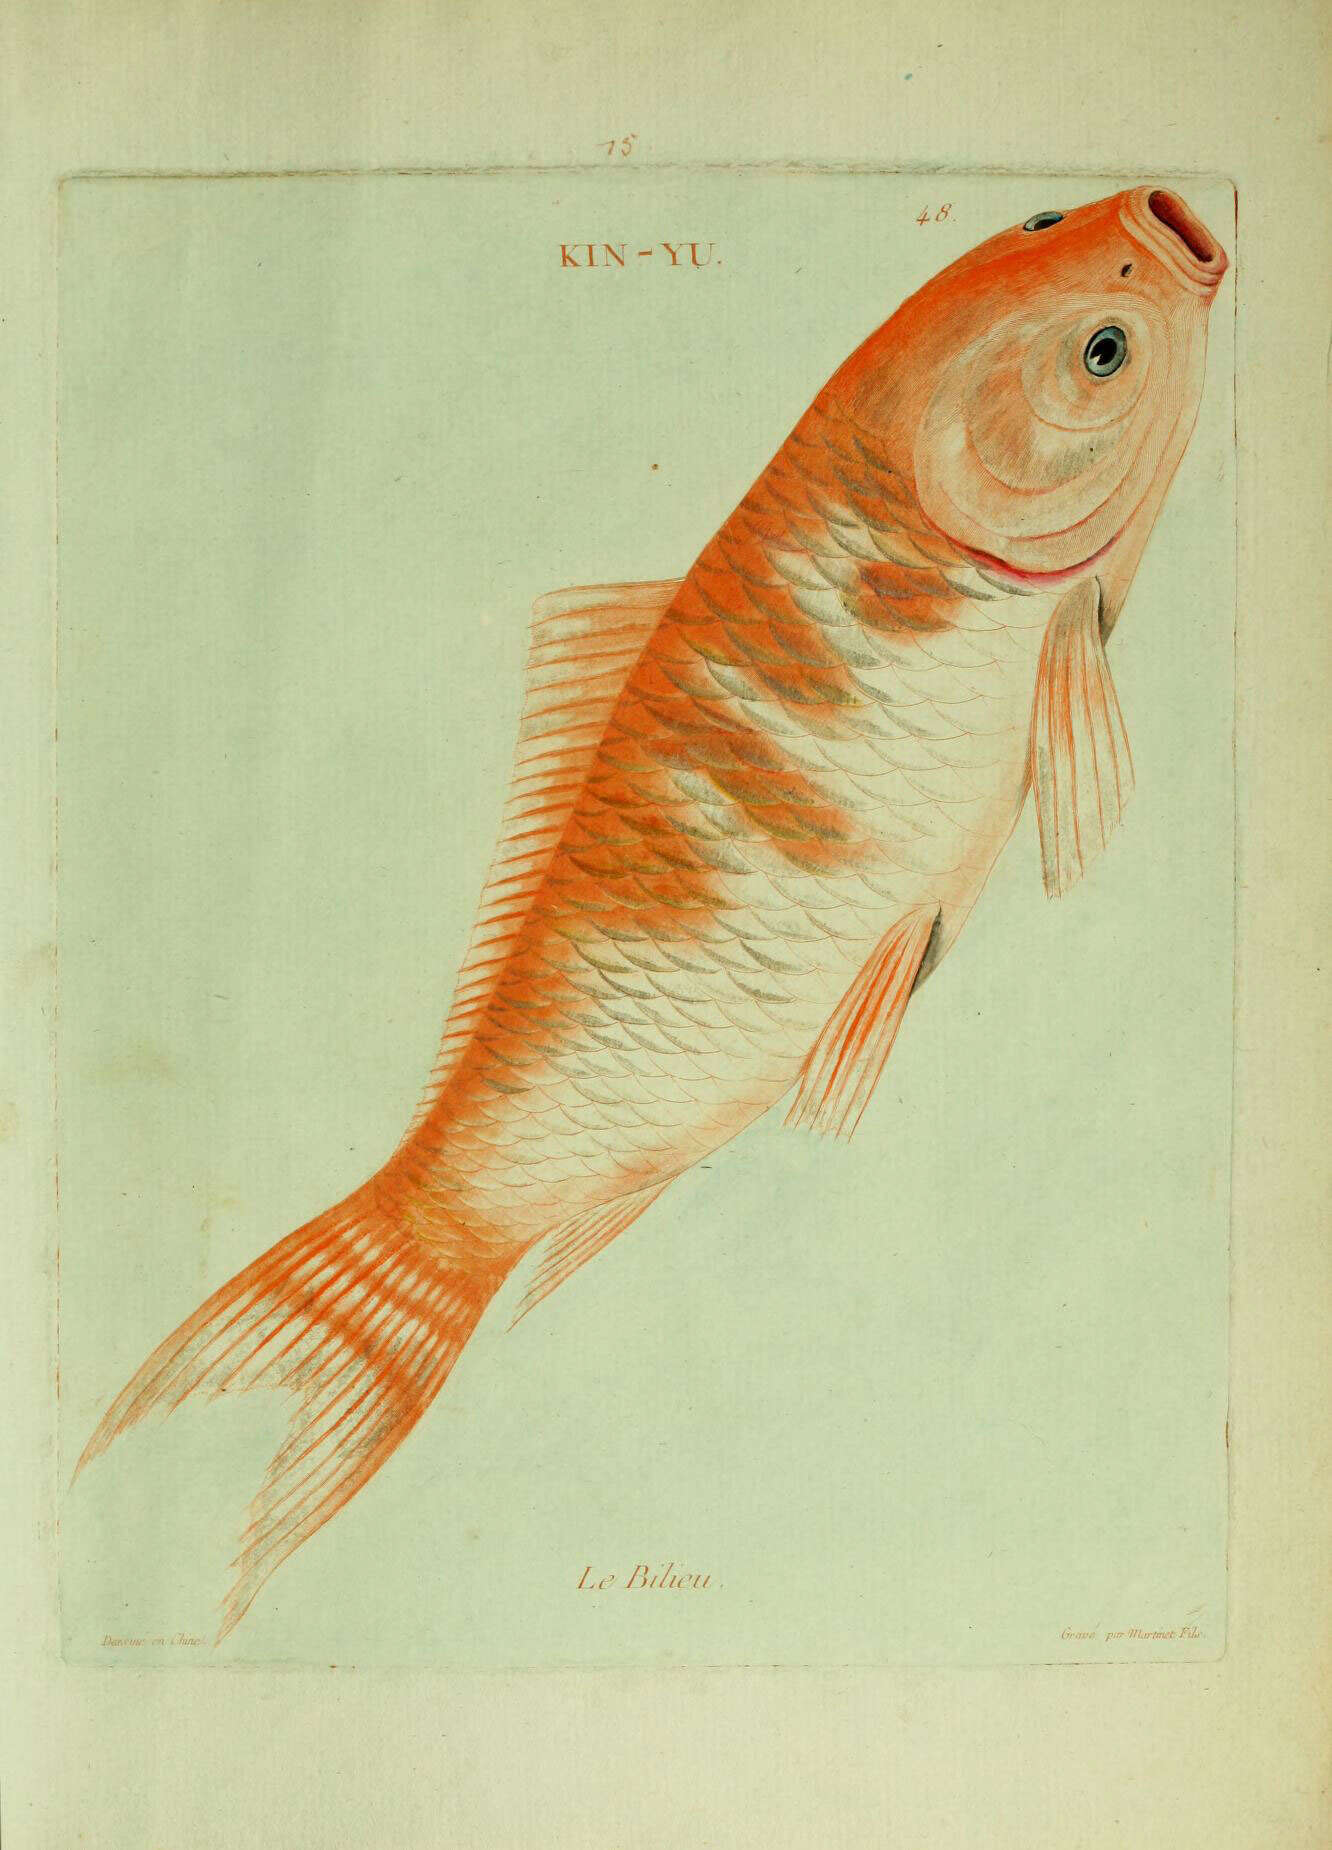 Image of carps and minnows